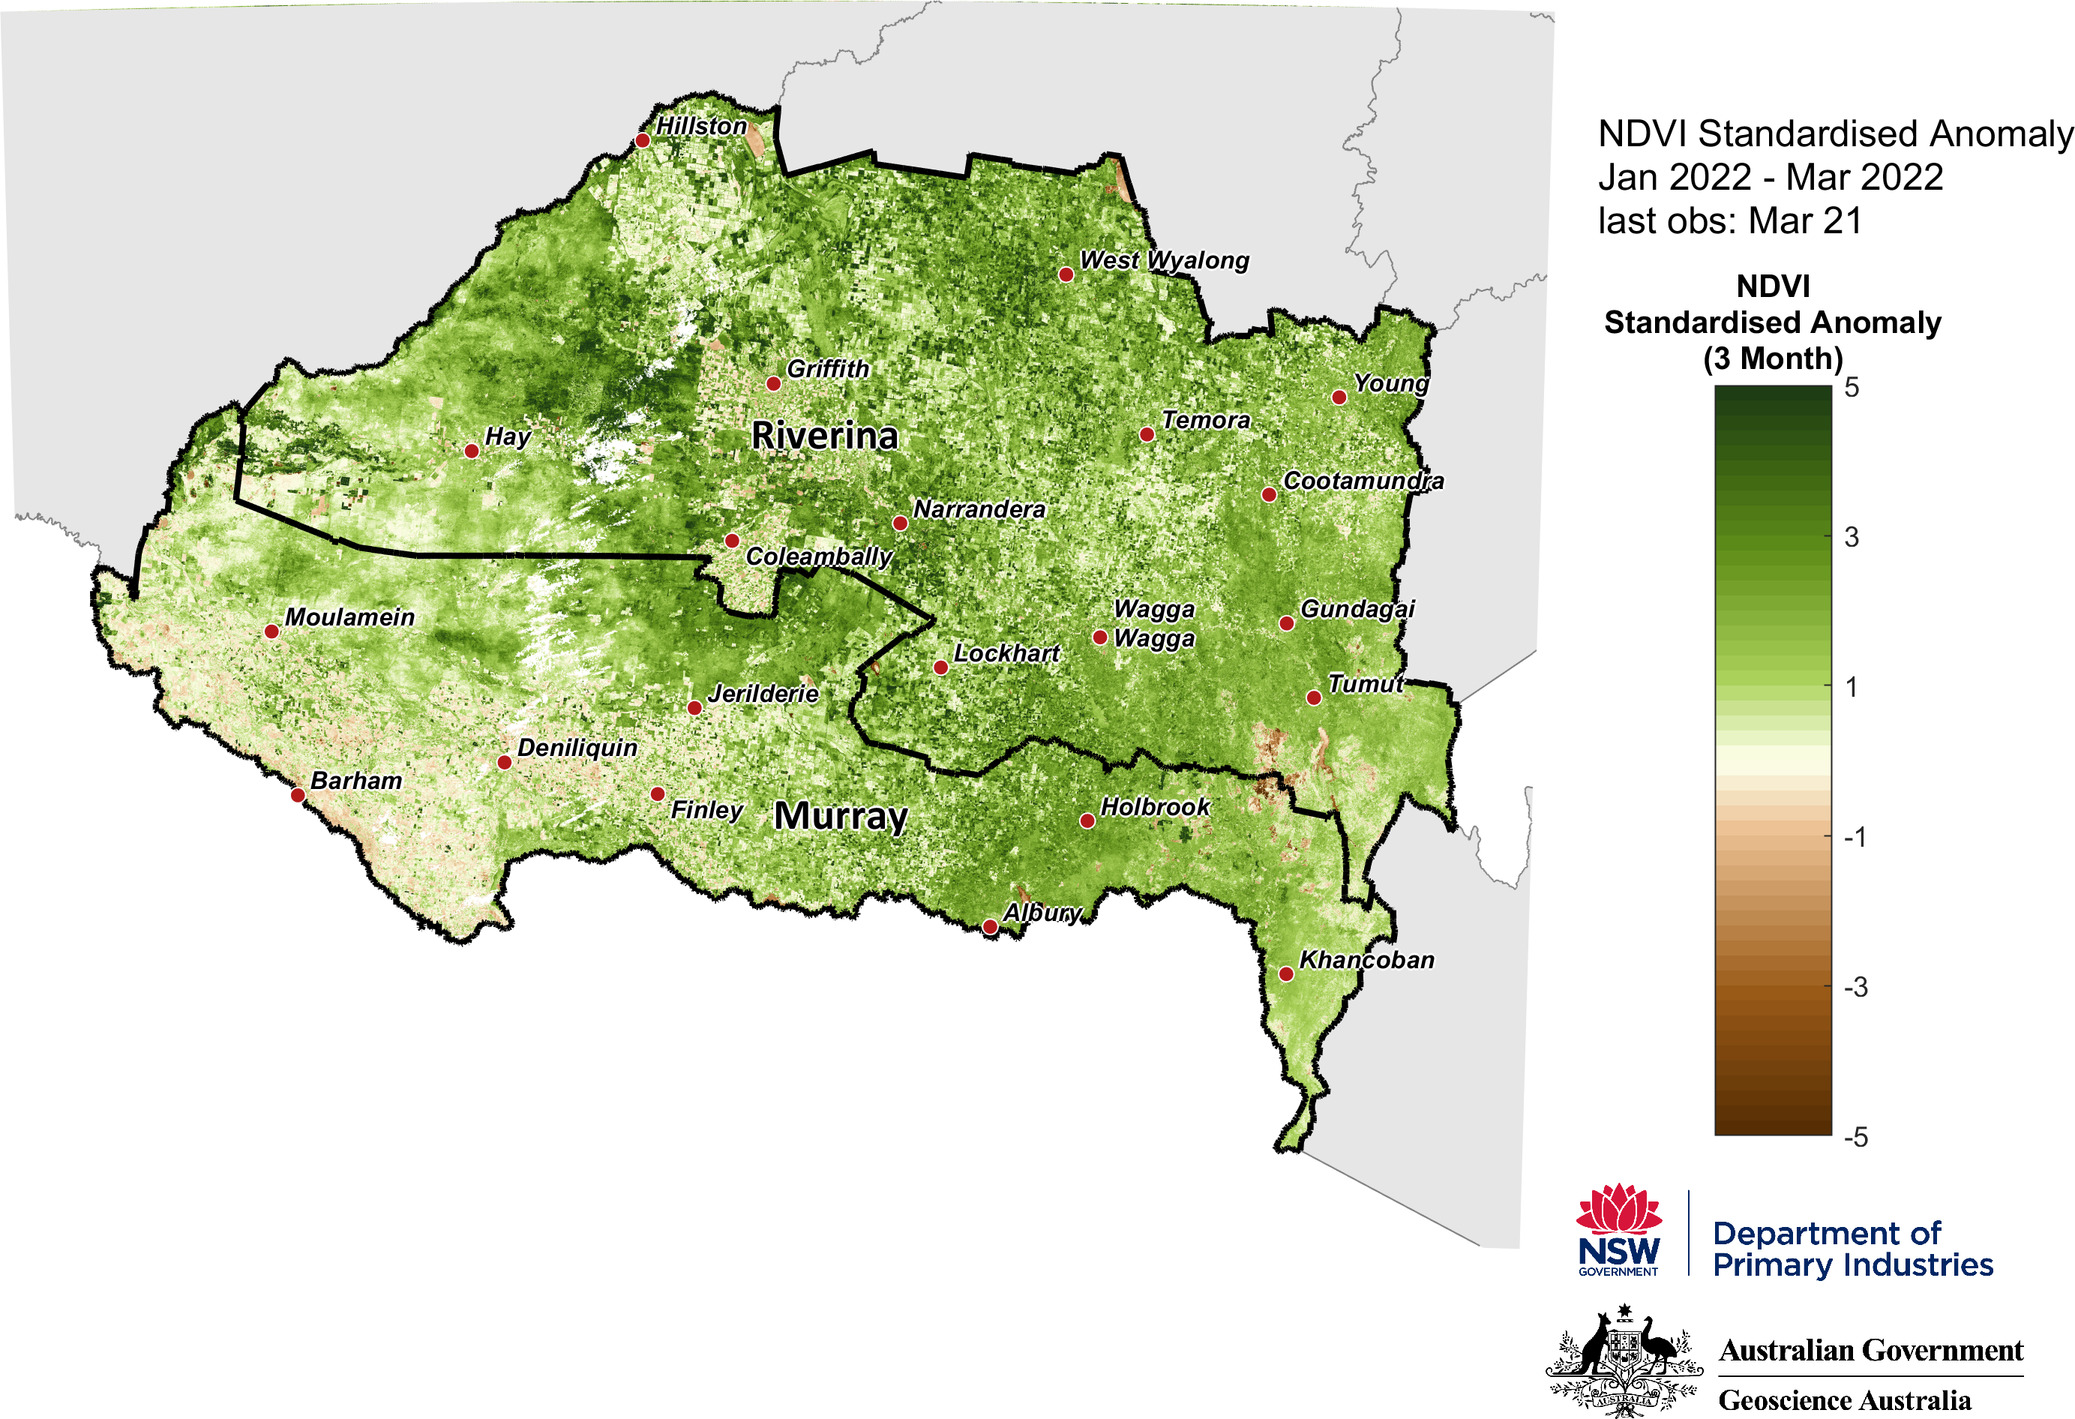 Figure 12. NDVI anomaly map for the Murray and Riverina LLS regions 